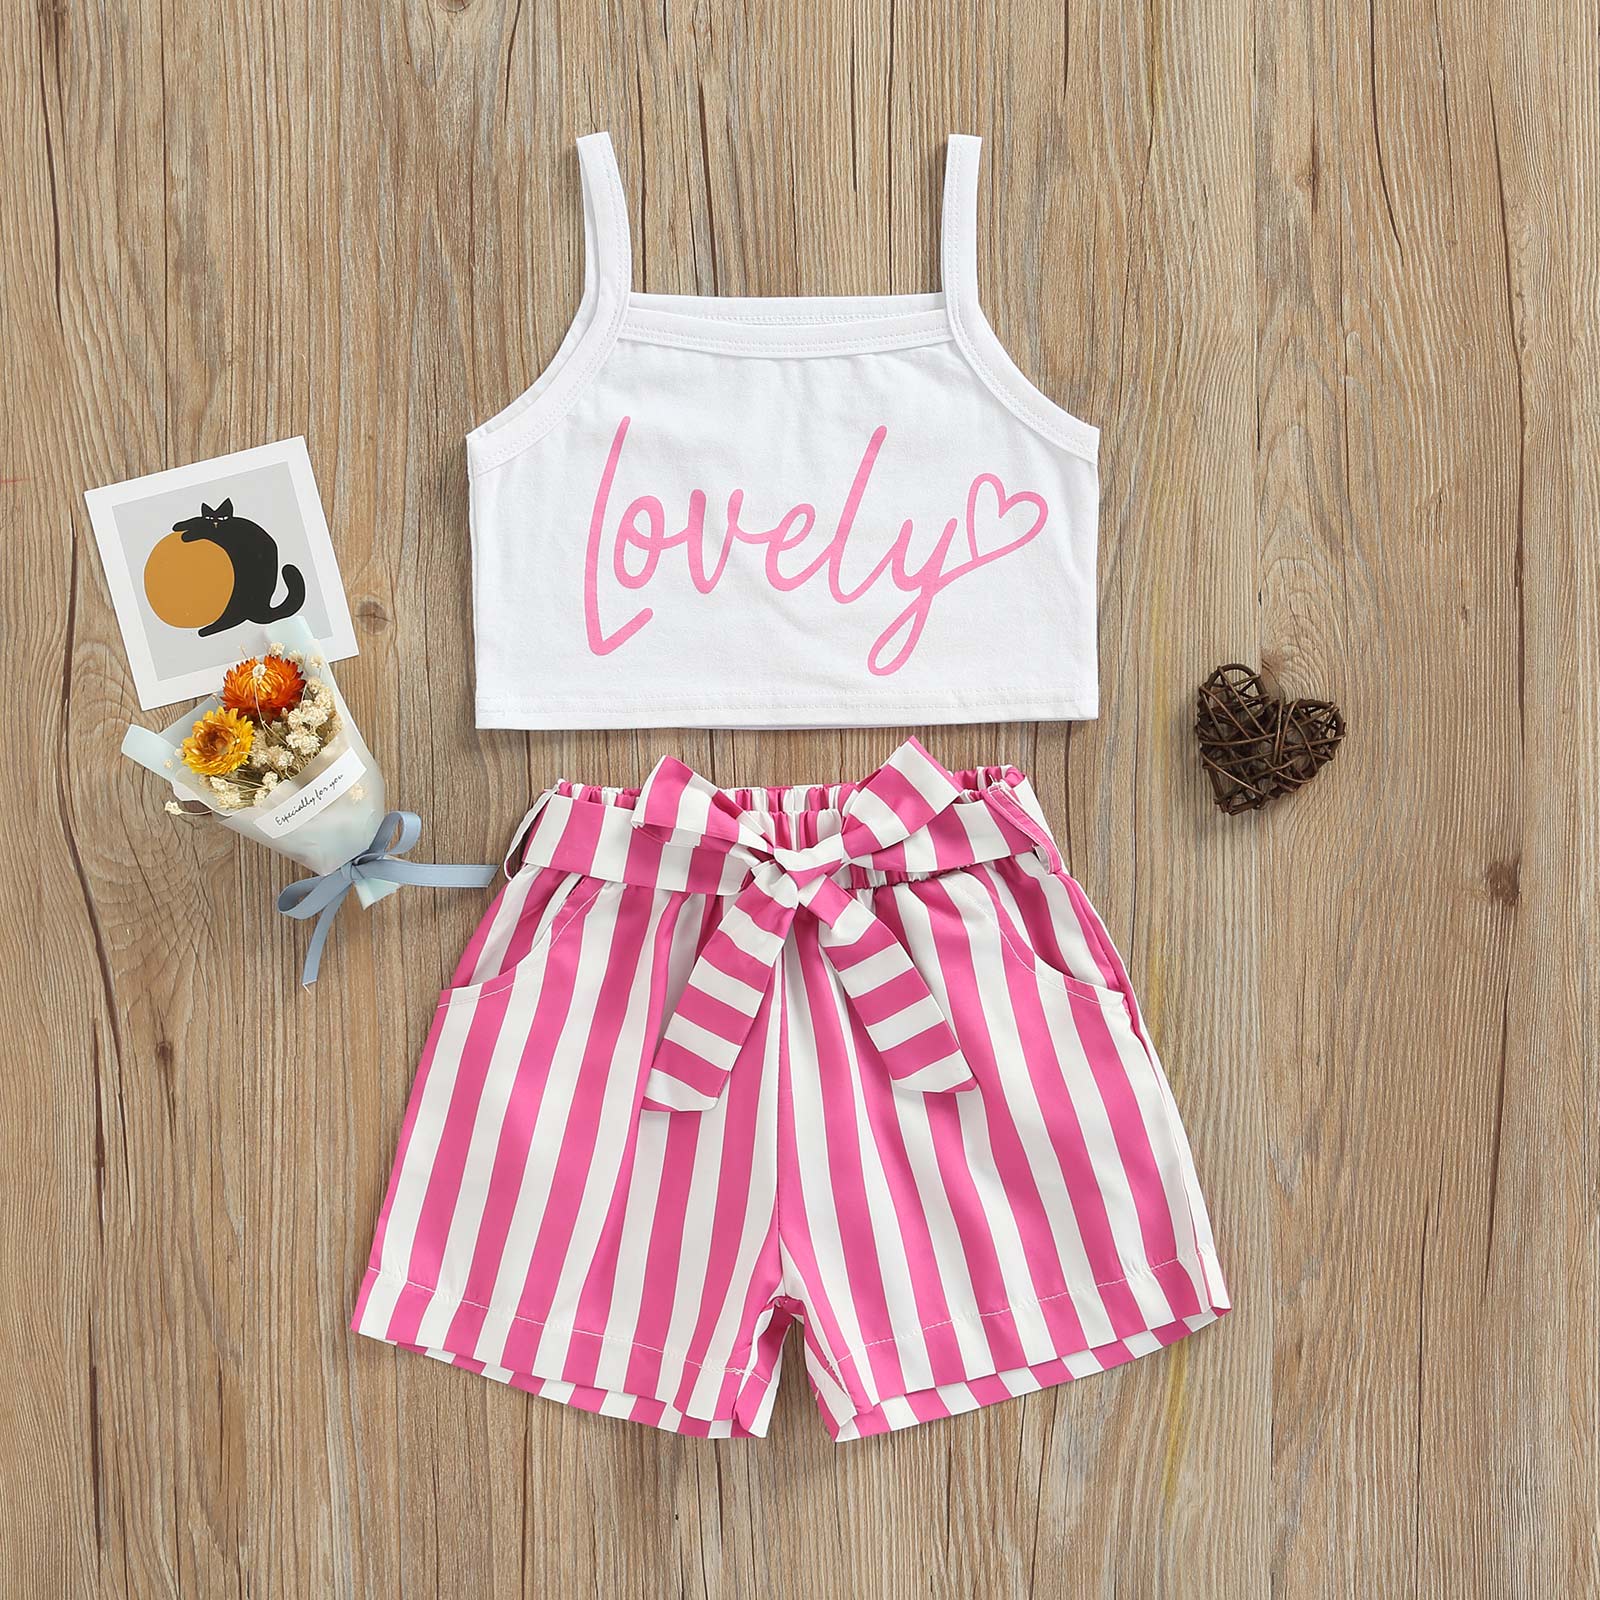 Lovely Crop Top with Candy Shorts